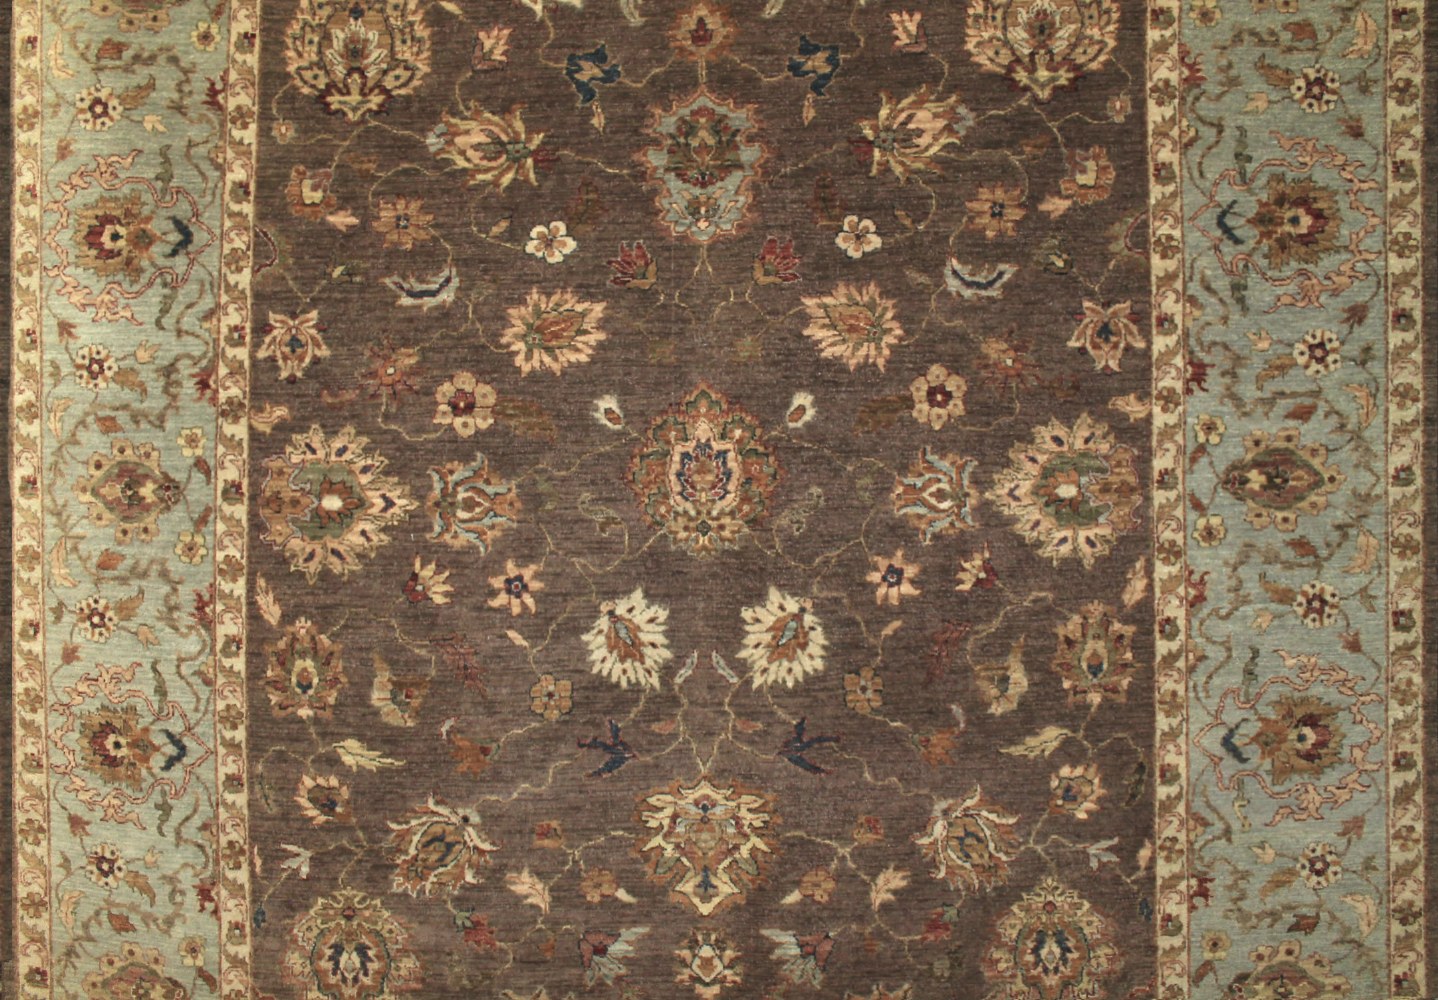 8x10 Traditional Hand Knotted Wool Area Rug - MR13132